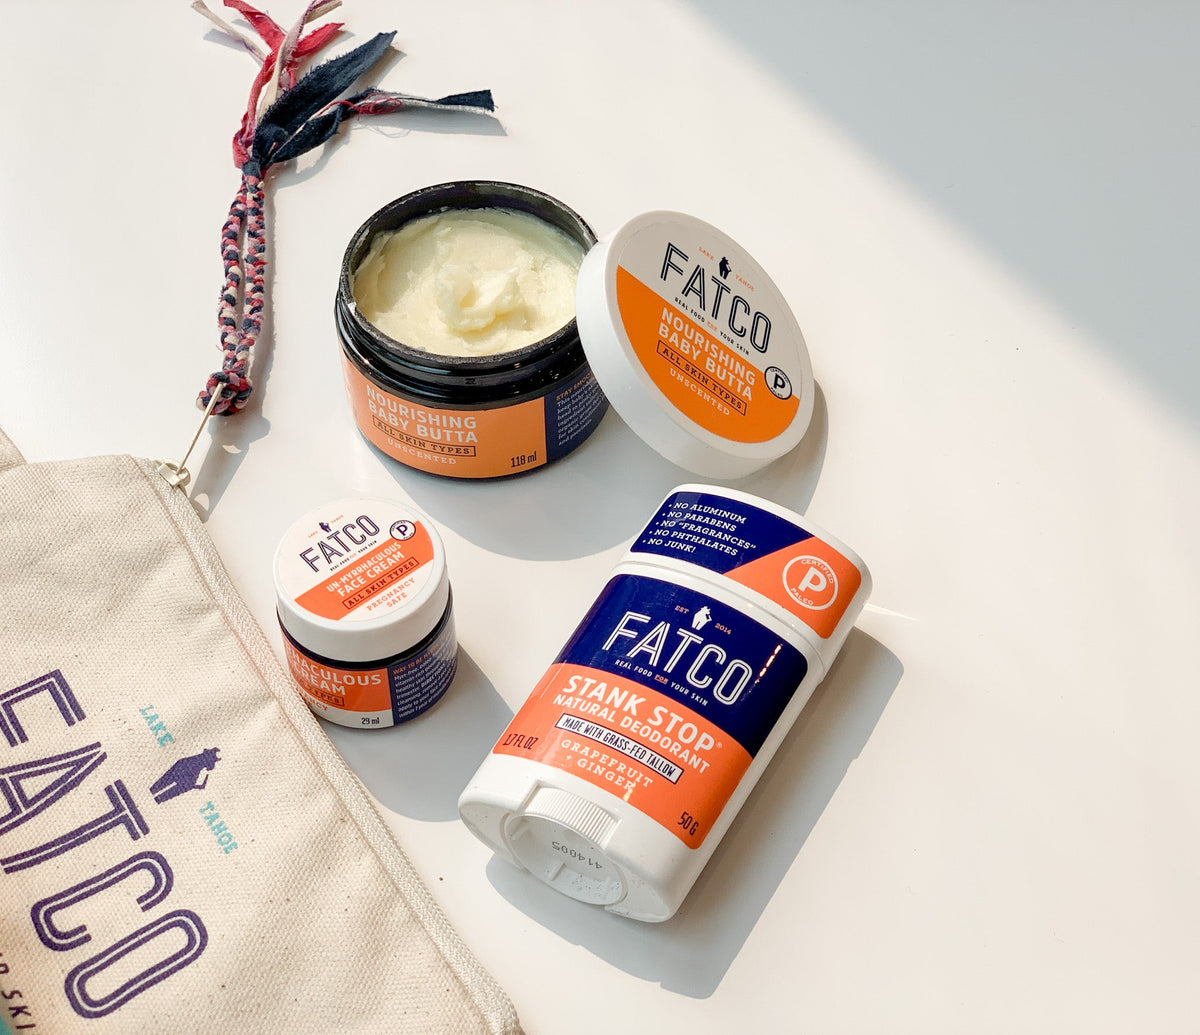 "Mama-to-be" Gift Set by FATCO Skincare Products